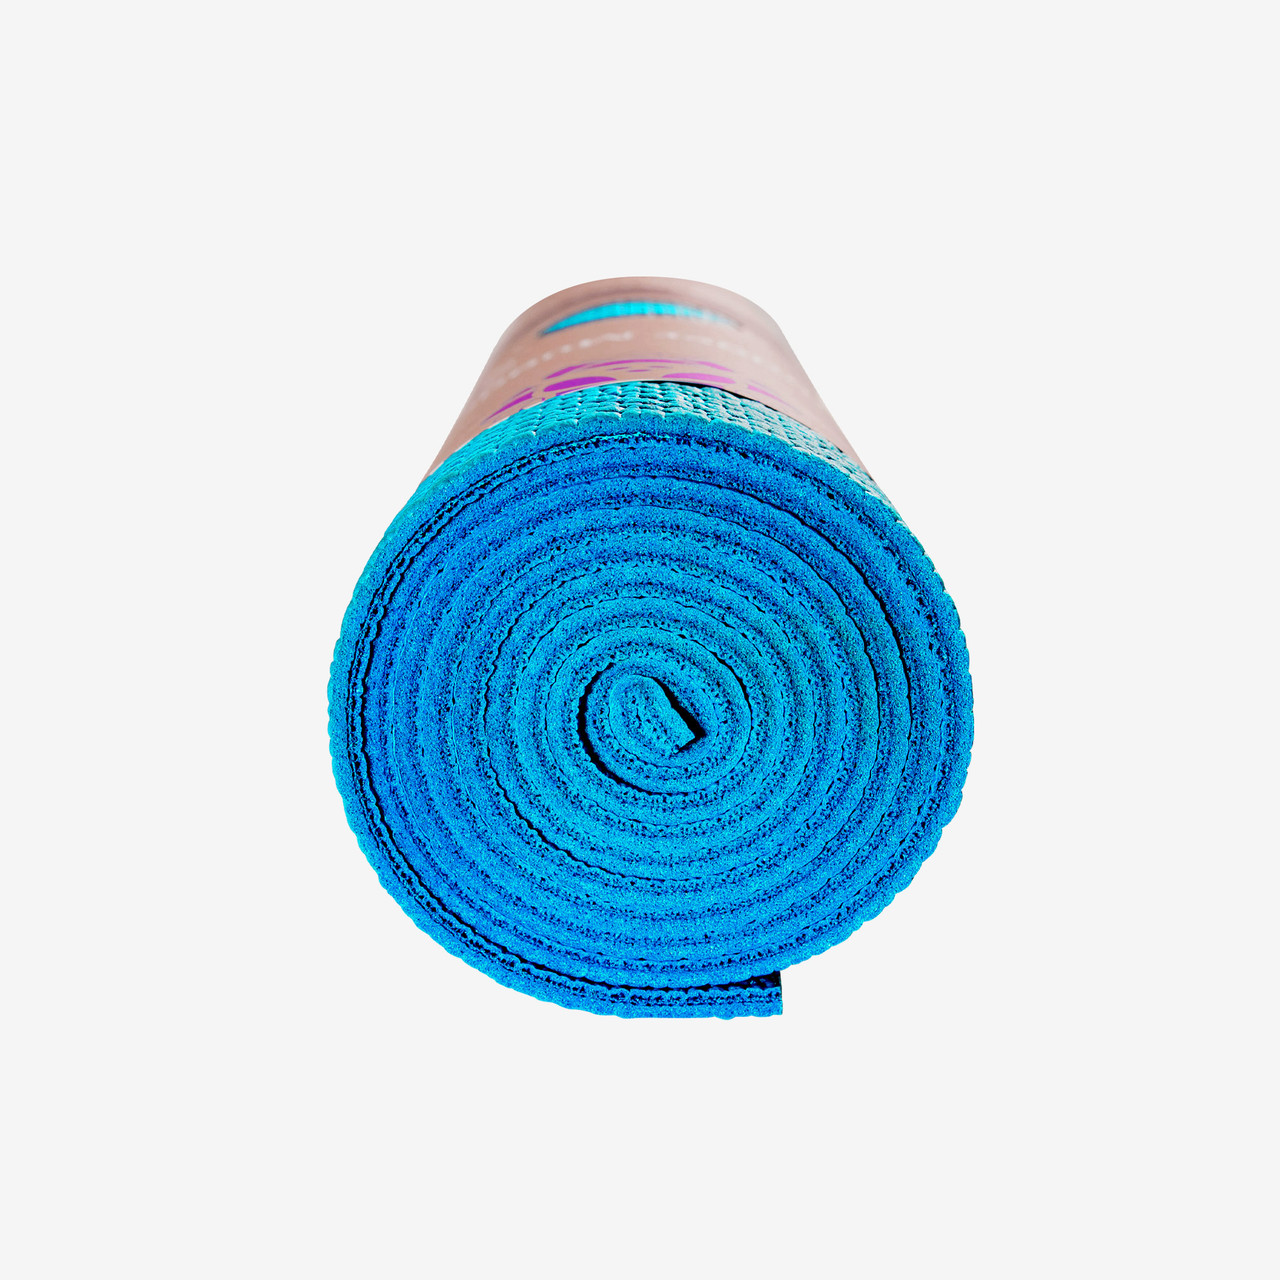 5 Great Yoga Mats for Tall People